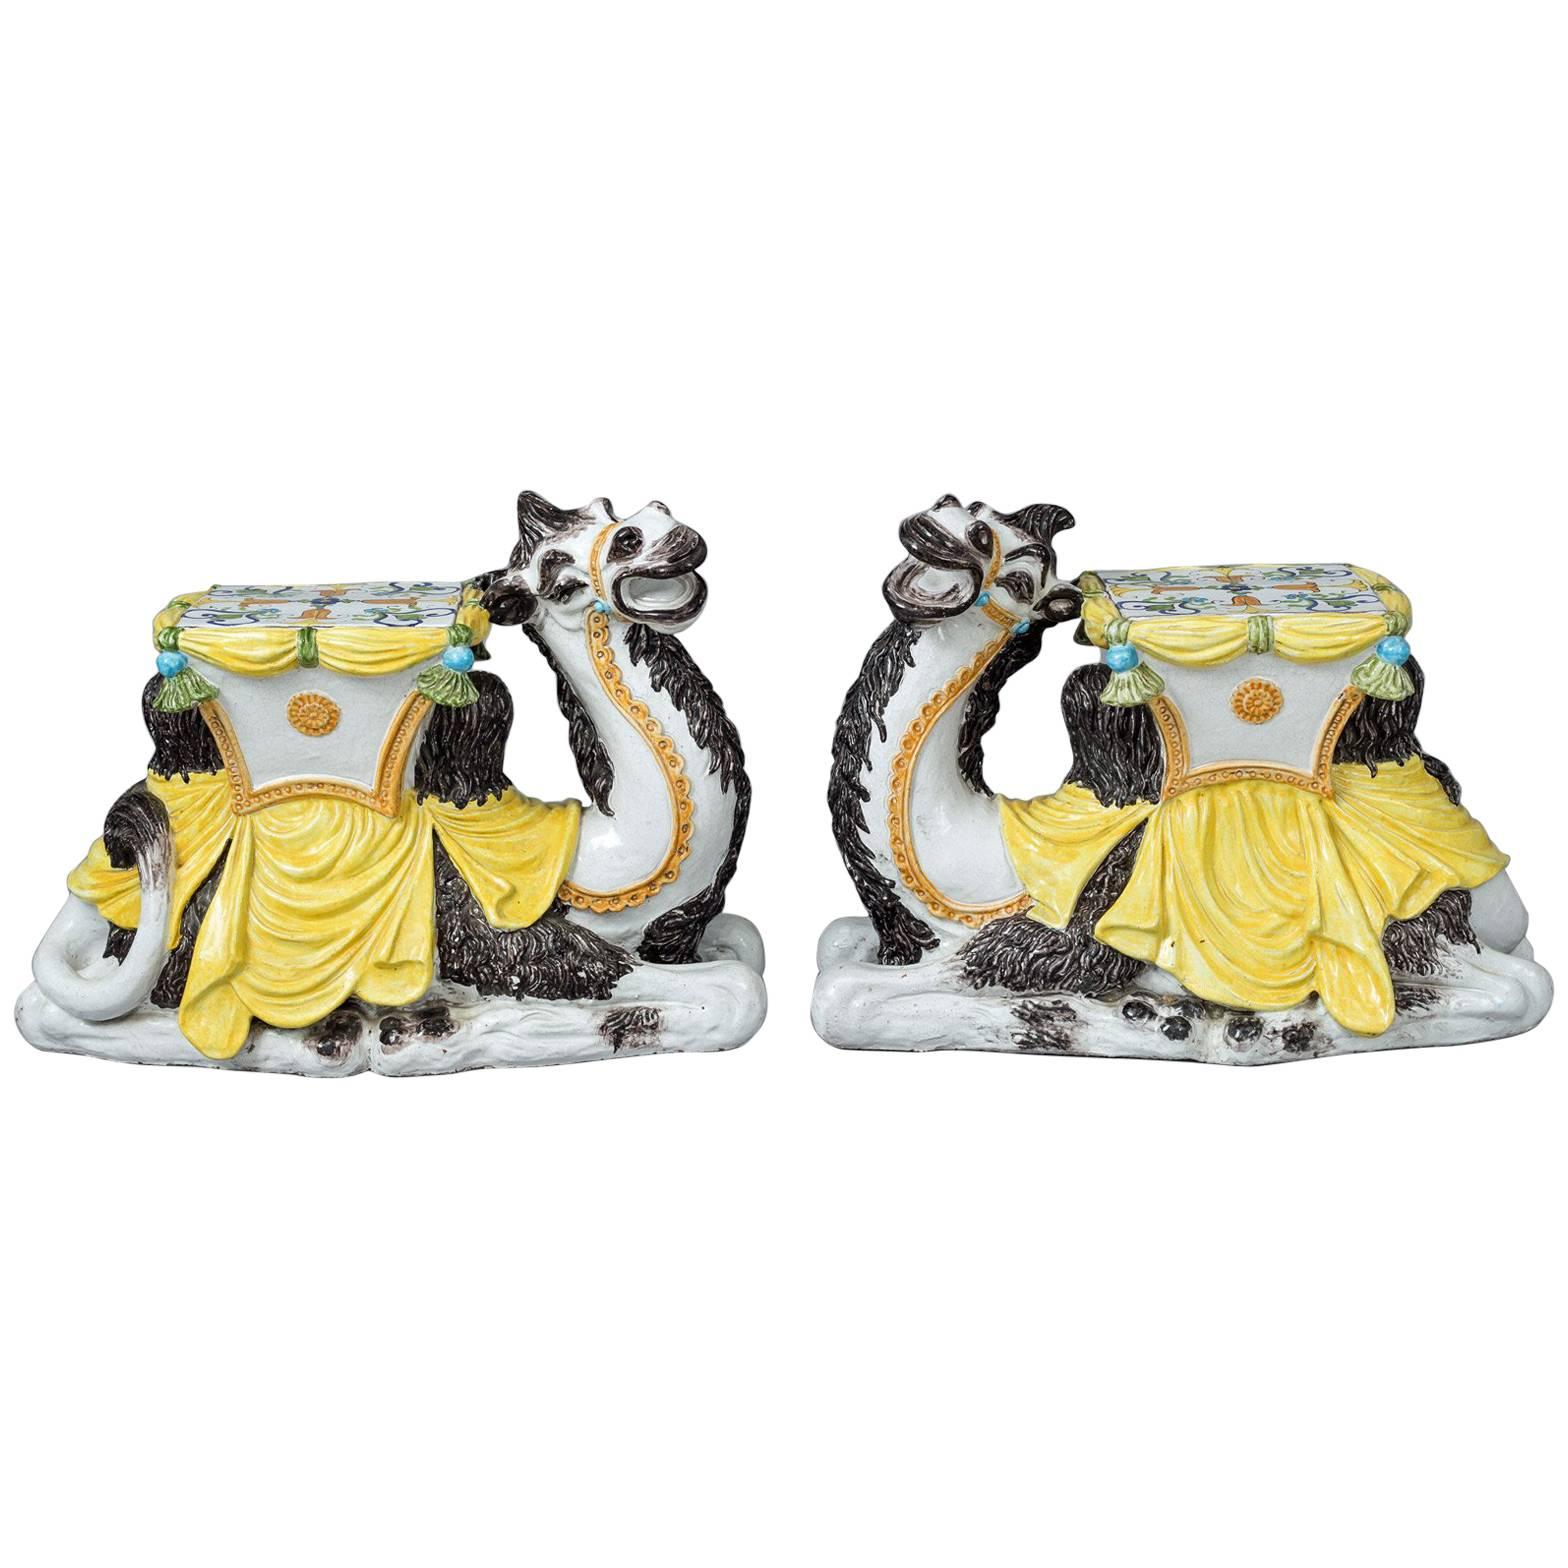 Pair of Italian Majolica Camel Side Tables or Garden Seat